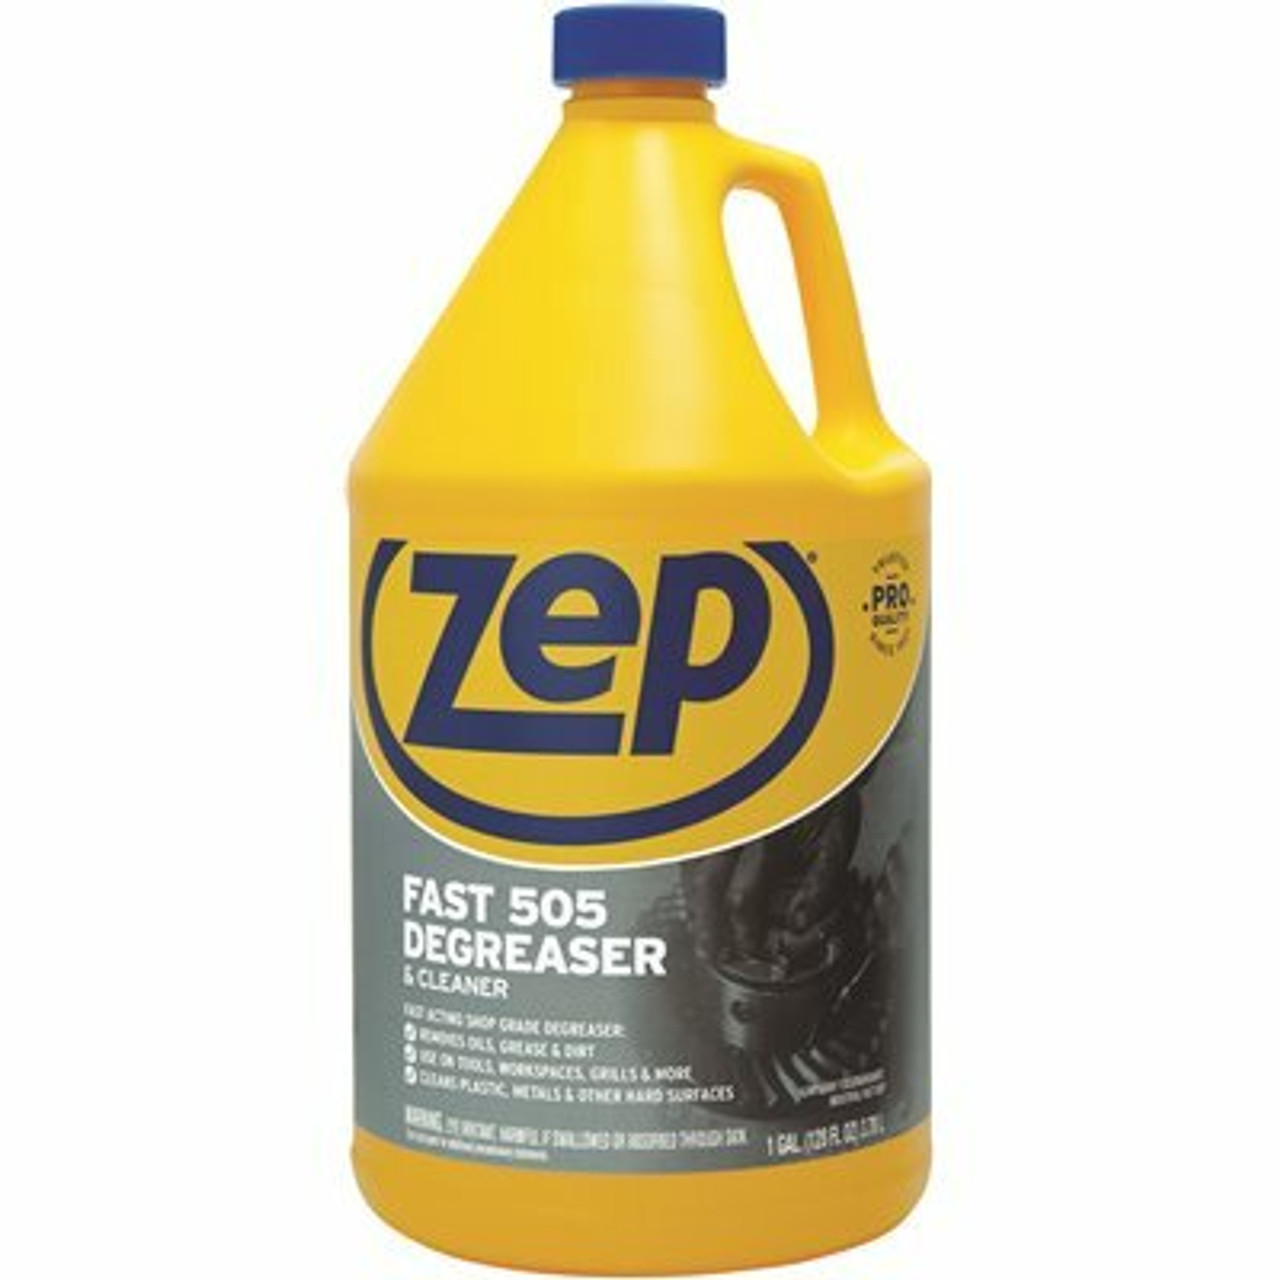 Zep 1 Gal. Fast 505 Degreaser